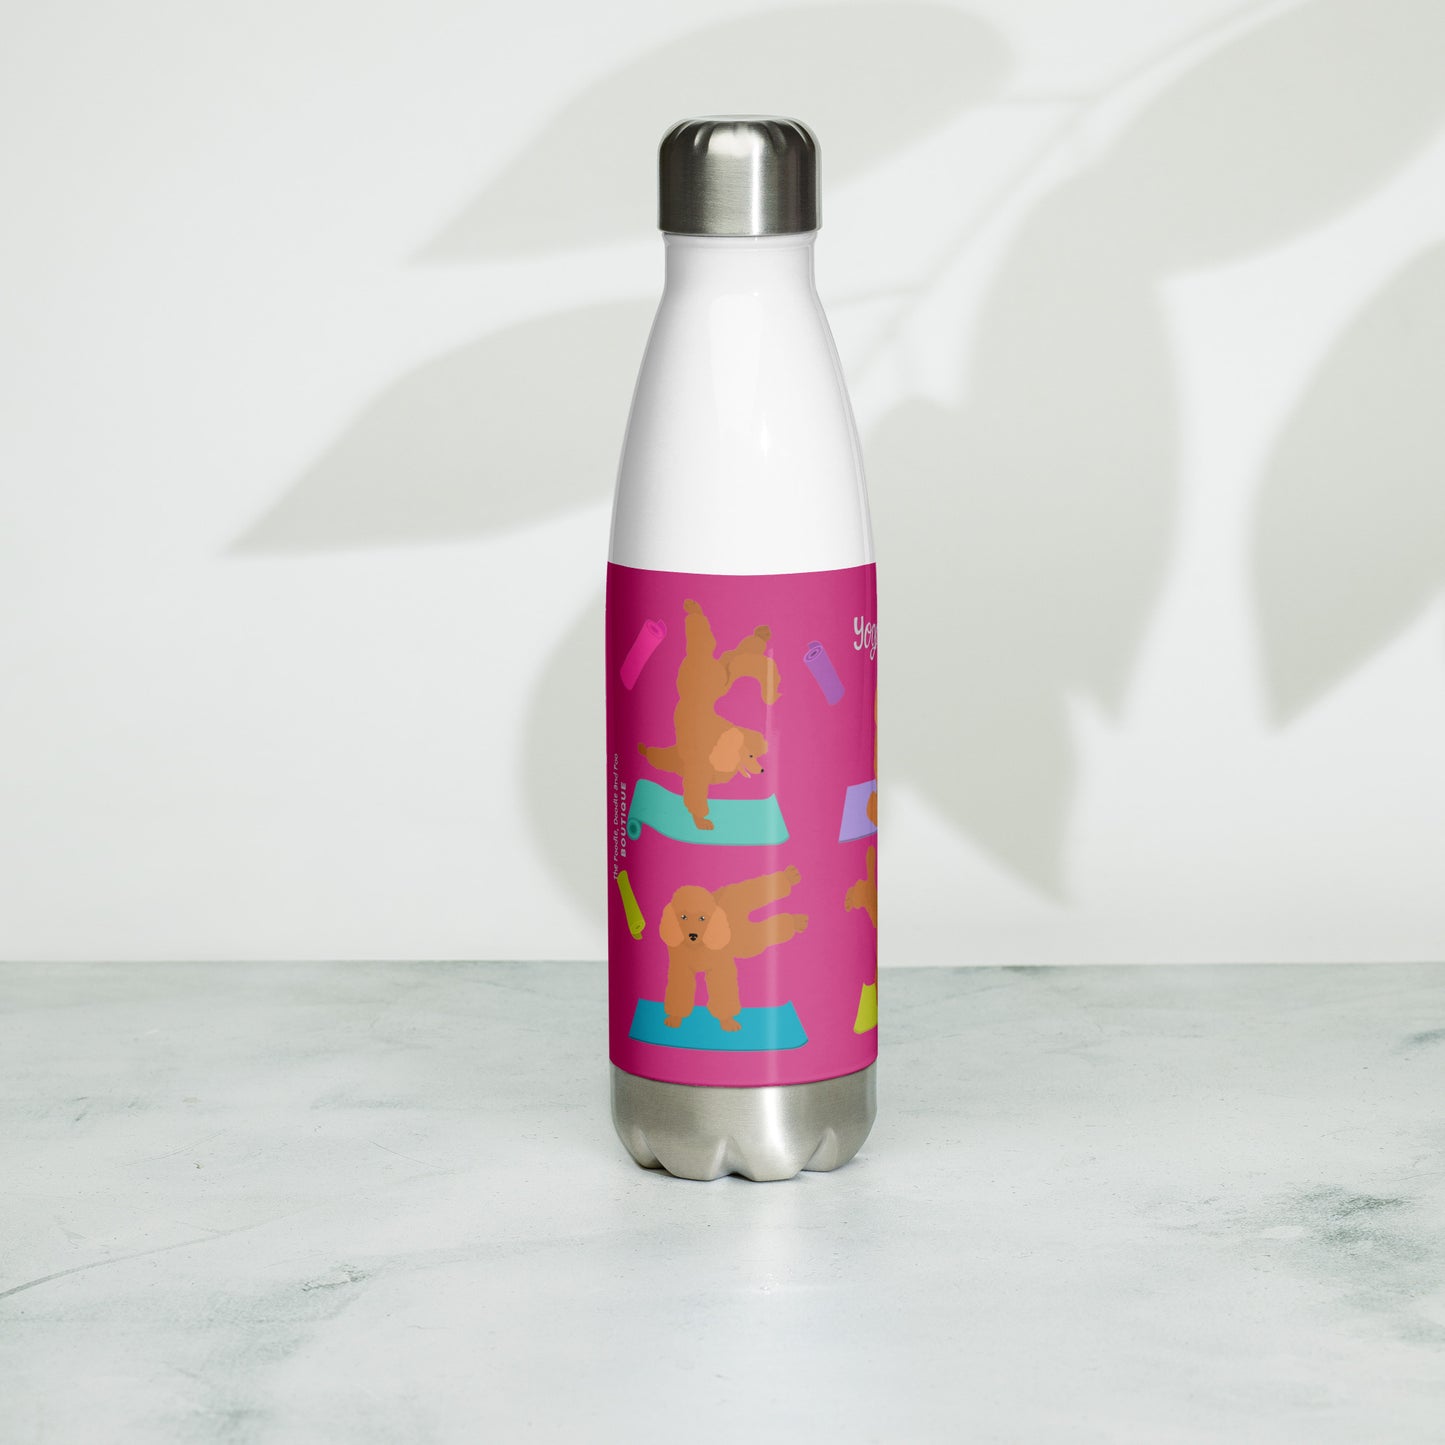 "Yoga Poodles" Stainless steel water bottle - in pink